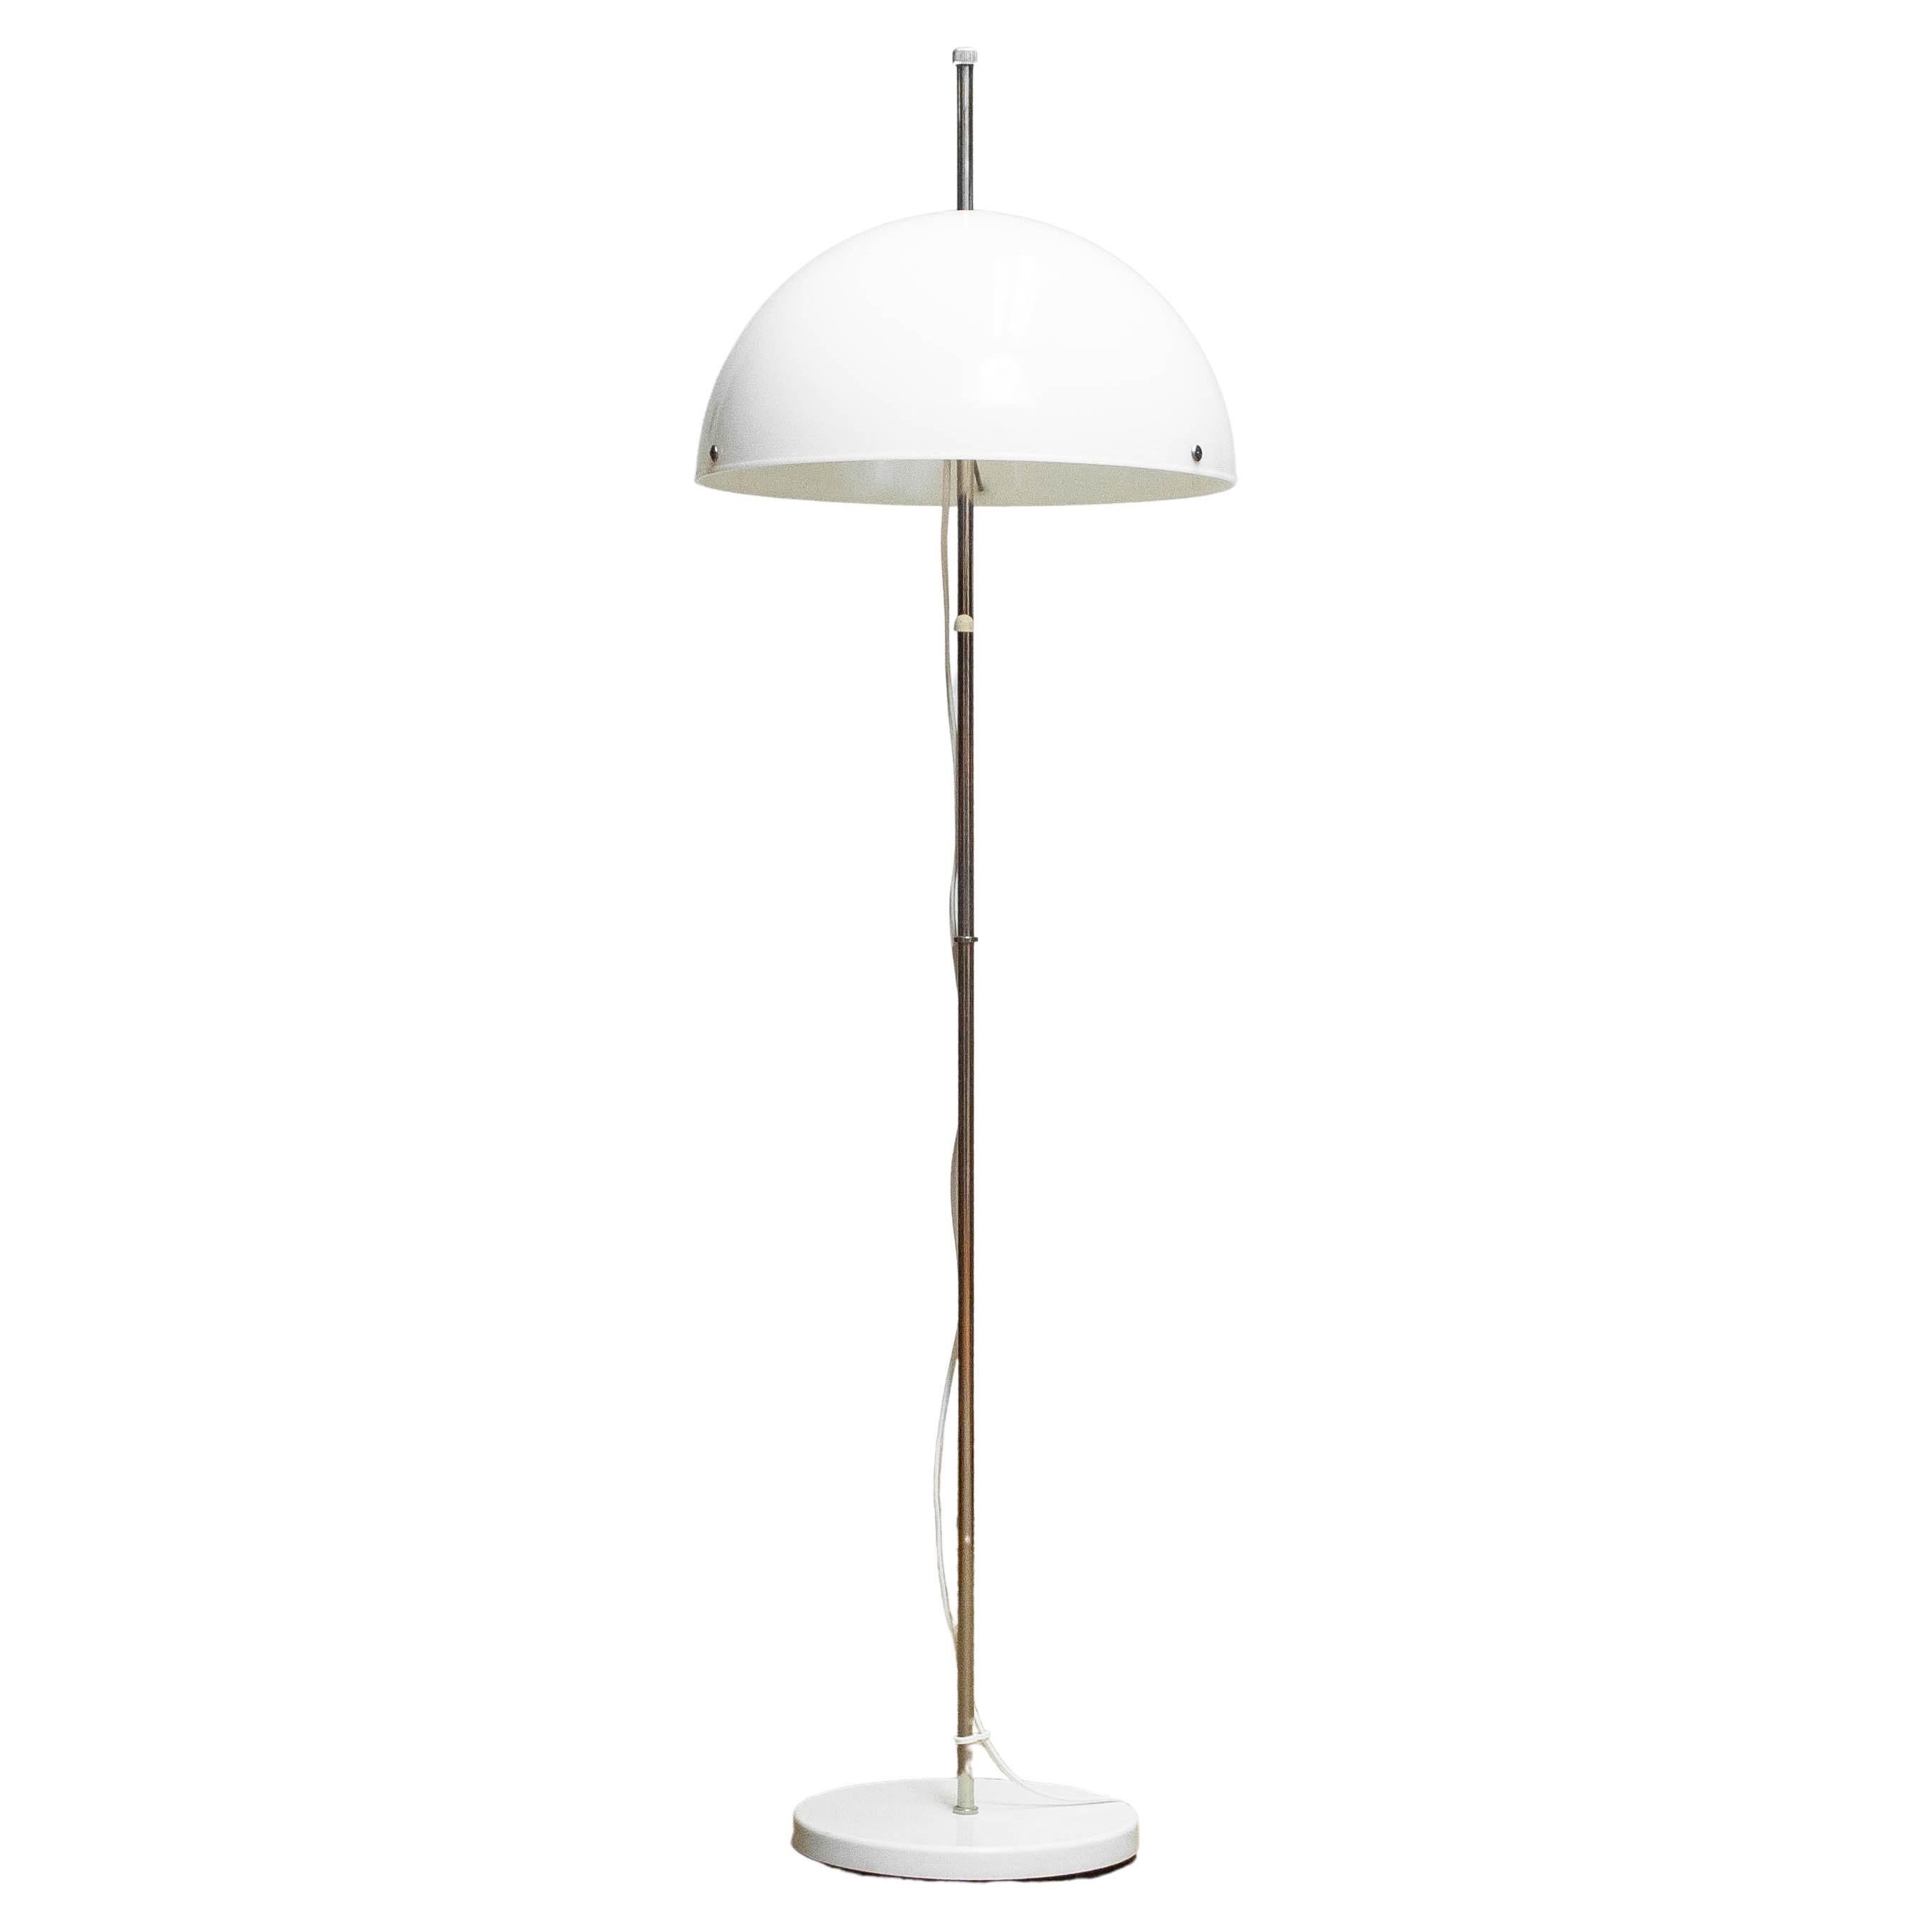 1970's Chrome and White Acrylic Mushroom Floor Lamp Made by Fagerhult Sweden